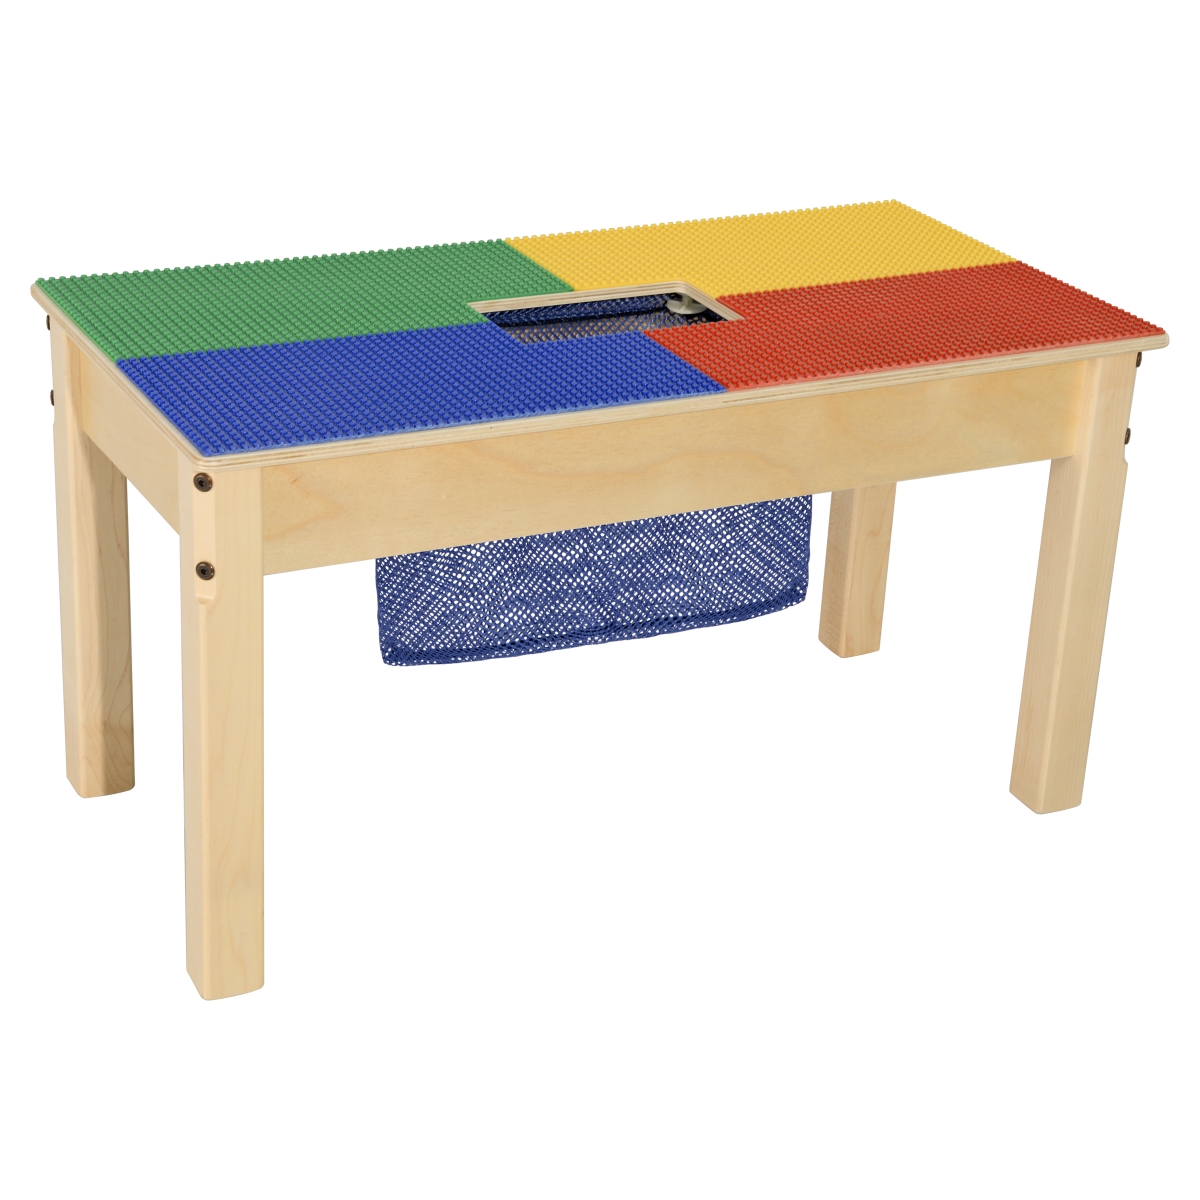 Tp1631sgn14 14 In. Lego Compatible Rectangle Table With Legs, Multi Color